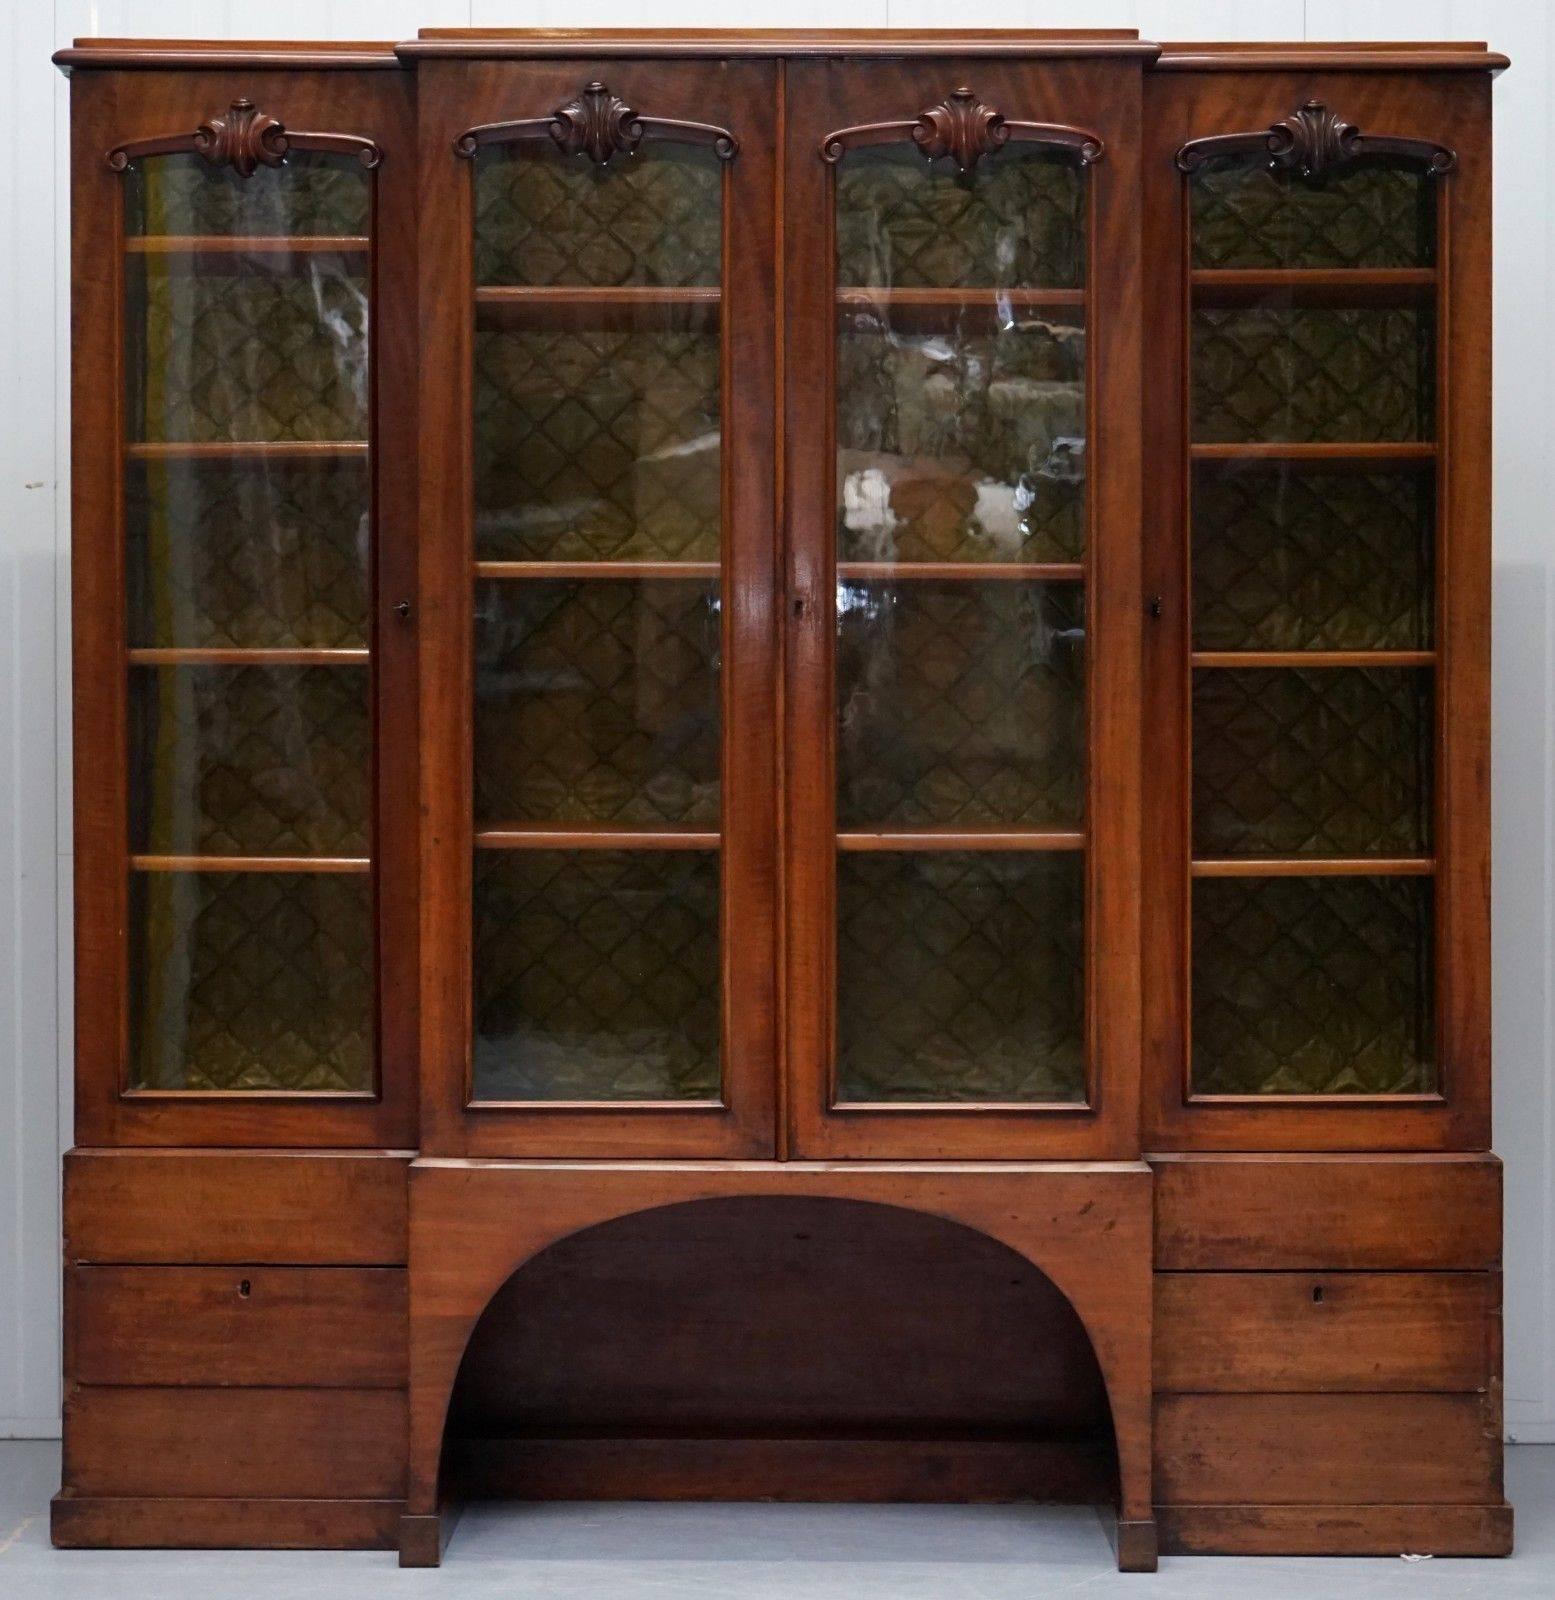 We are delighted to offer for sale absolutely stunning small solid mahogany Victorian breakfront library bookcase

A very rare size and an exceptional quality piece of furniture, the timber patina is to die for, the internals have all been padded